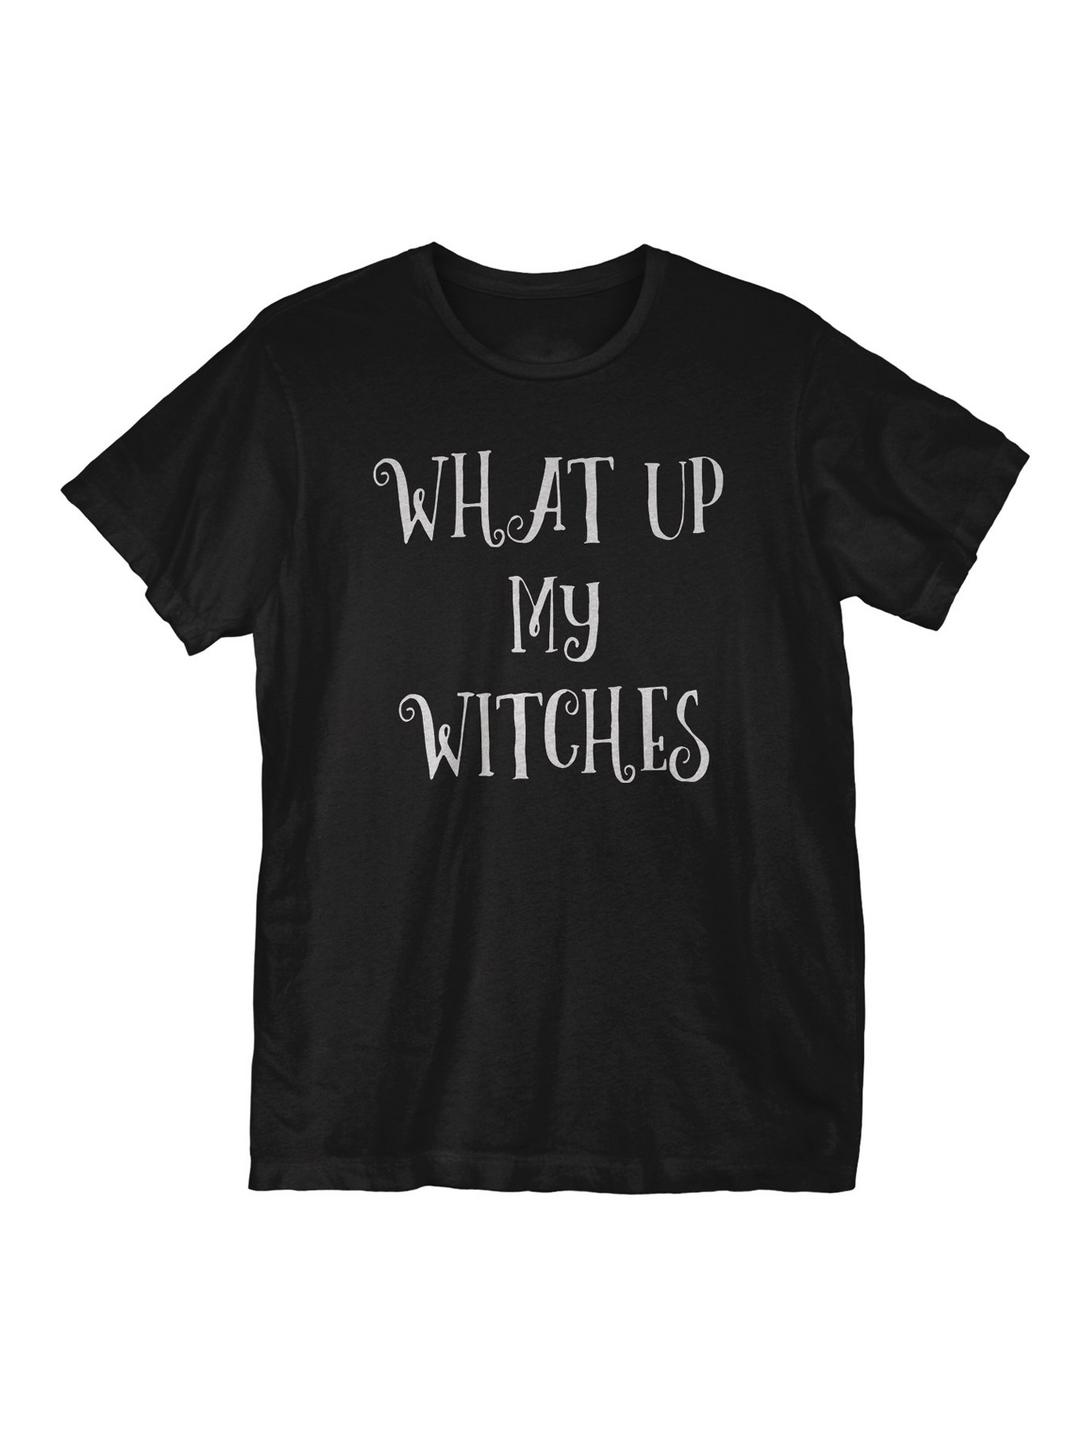 My Witches T-Shirt, BLACK, hi-res